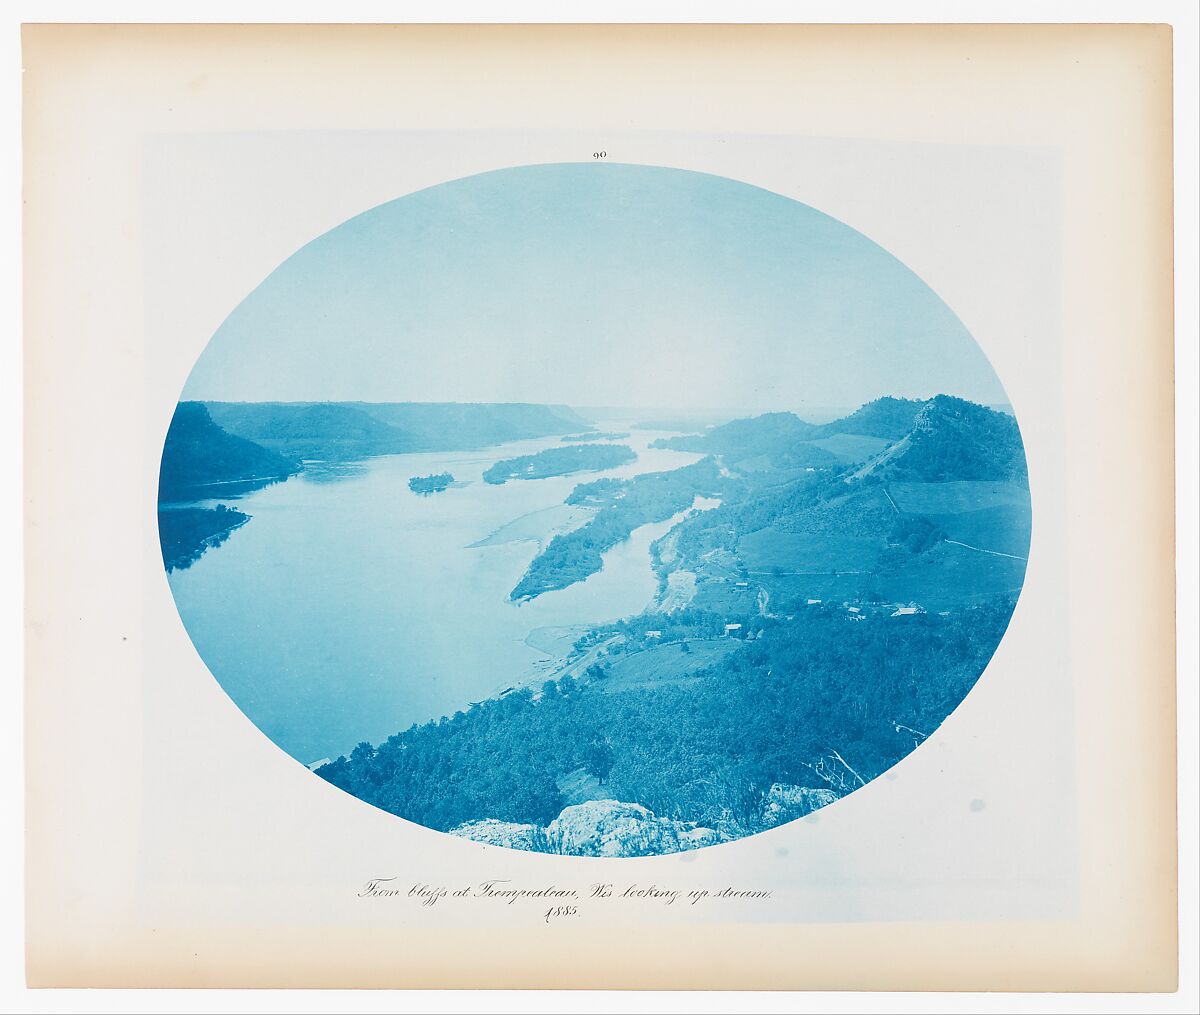 No. 90. From bluffs at Trempealueau, Wisconsin Looking Up Stream, Henry P. Bosse, Cyanotype